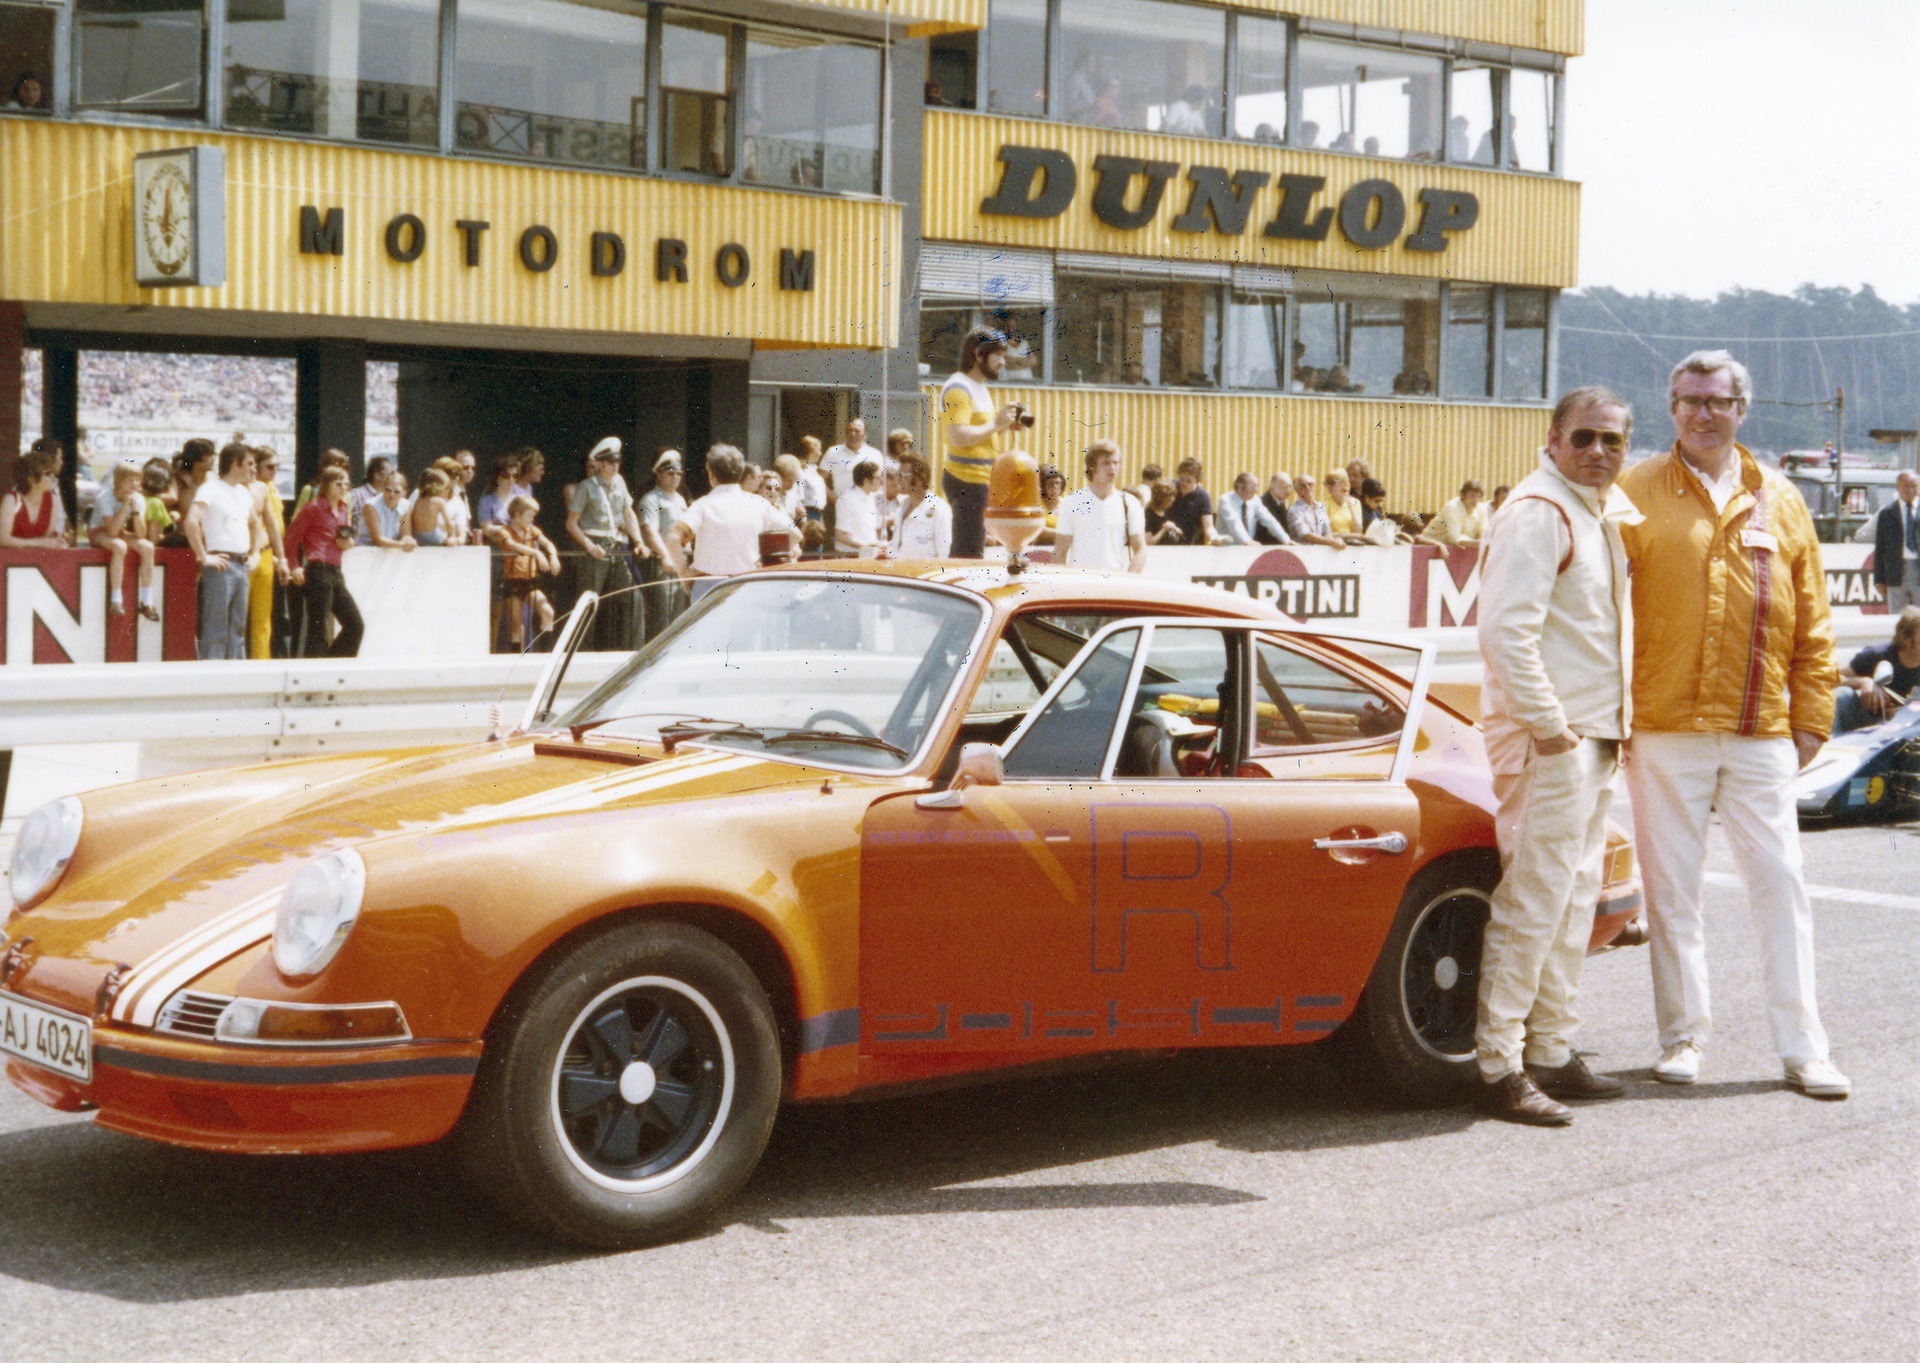 Herbert Linge on ONS duty again with a 911 at Hockenheim in 1973.